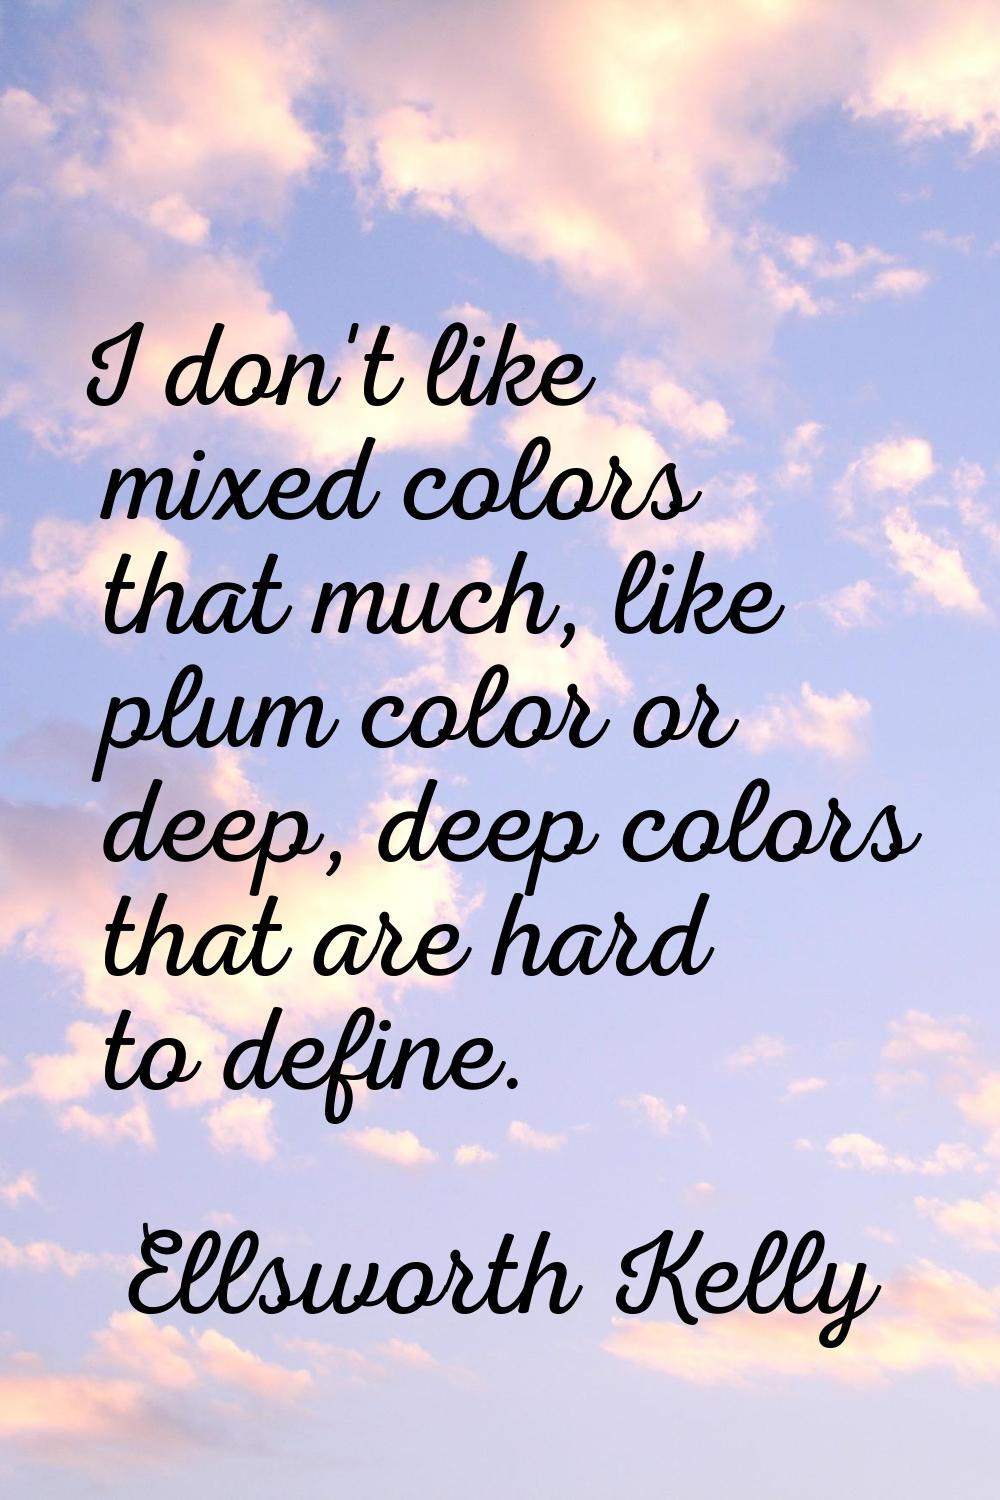 I don't like mixed colors that much, like plum color or deep, deep colors that are hard to define.